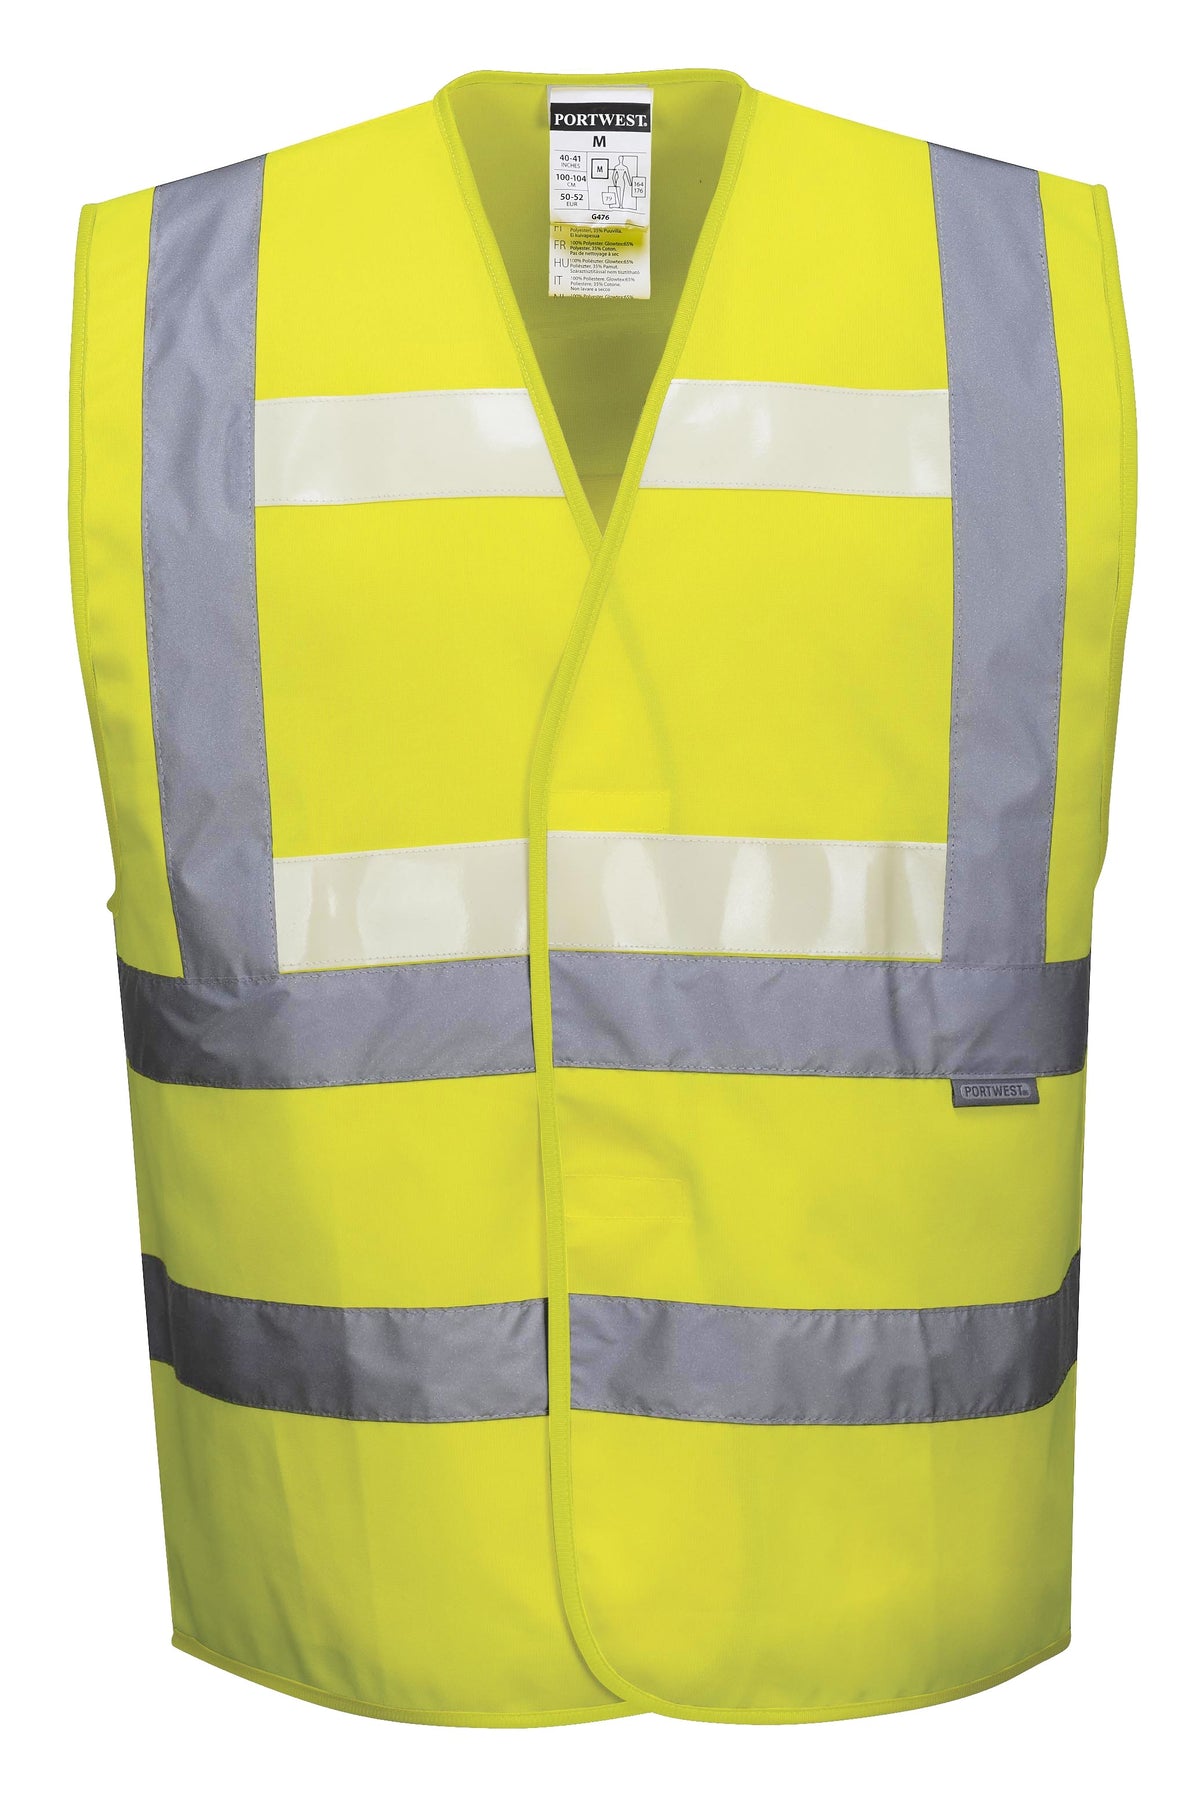 Triple Technology Vest - Safety Ansi Class 2 - High Visibility (Hi Vis Yellow)